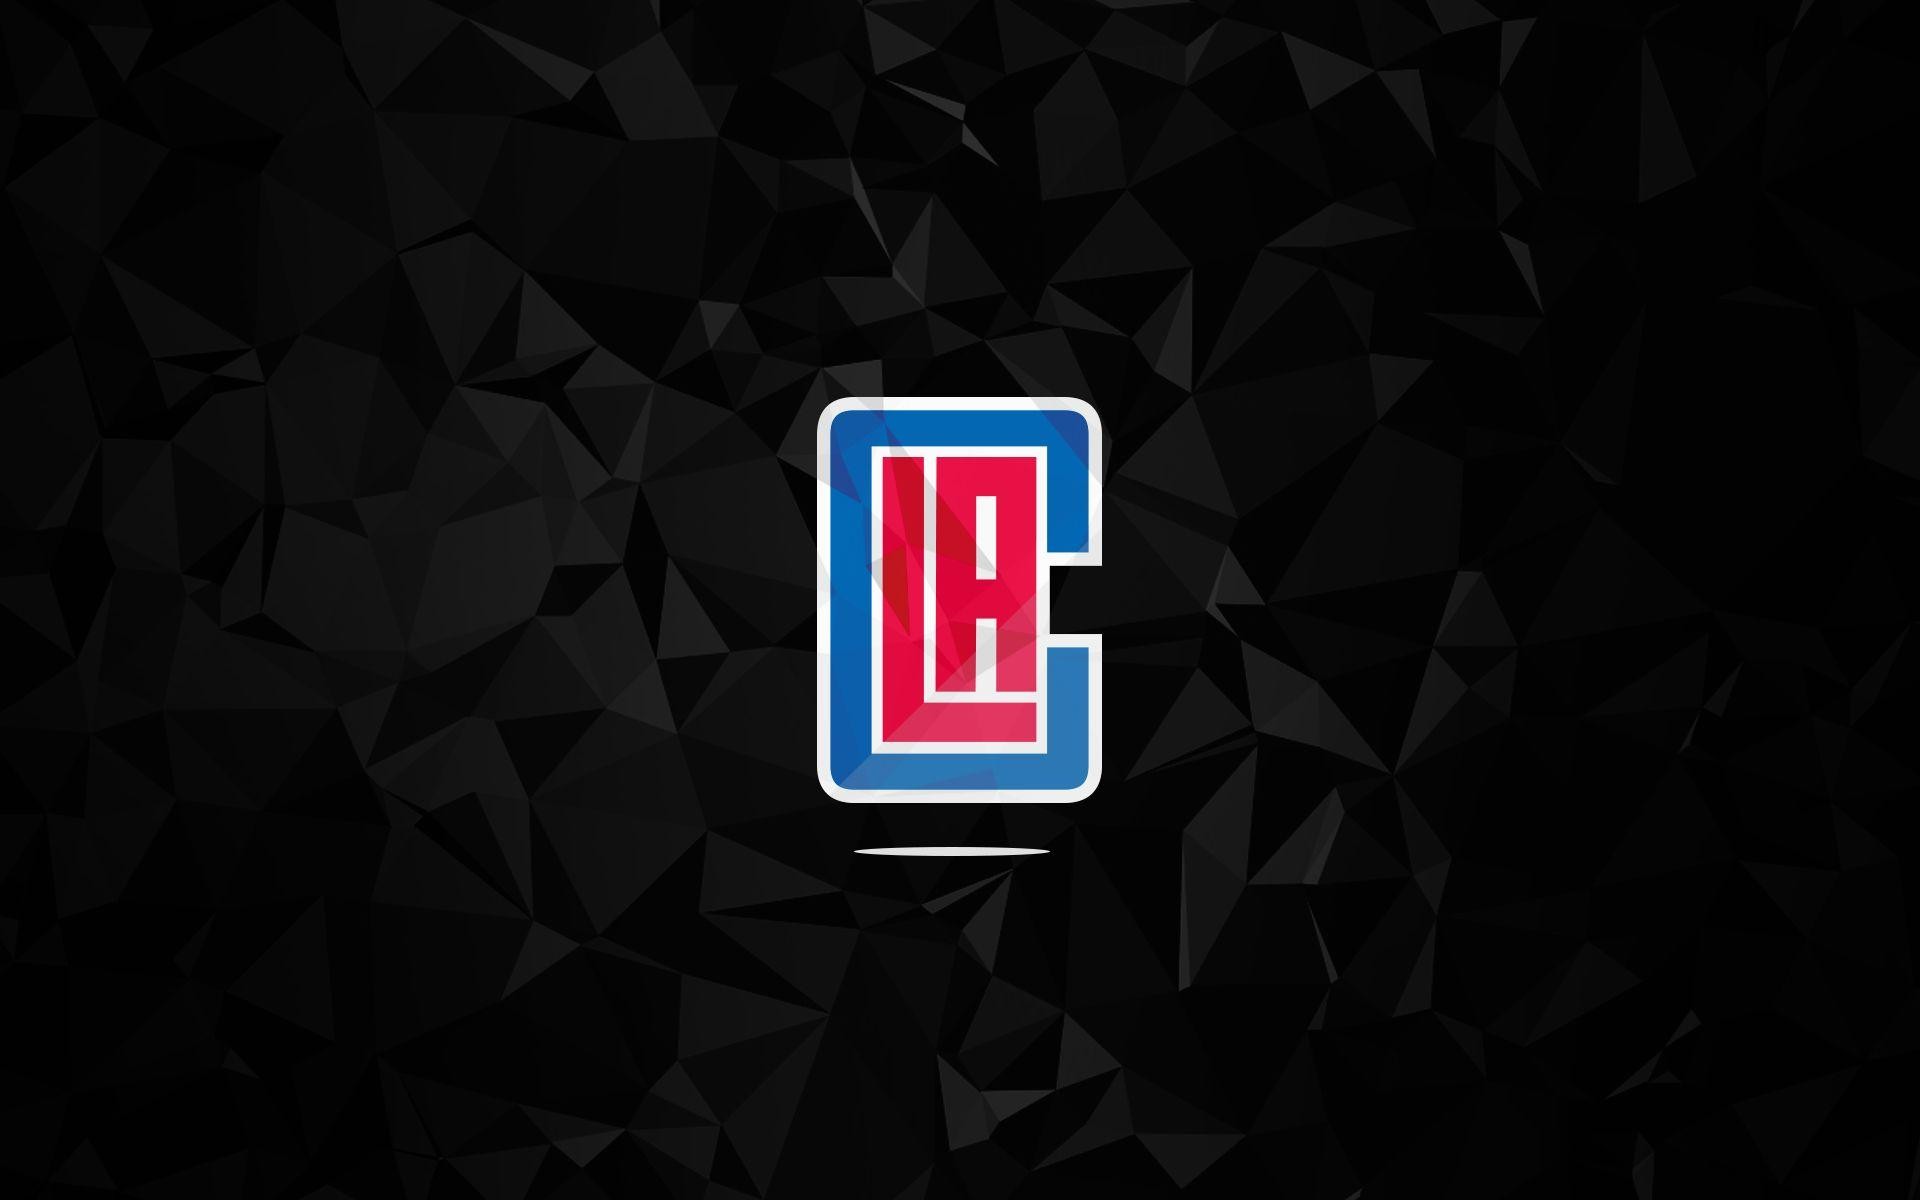 1920x1200 Losangeles Clippers Logo Wallpapers Download Free | HD Wallpapers .